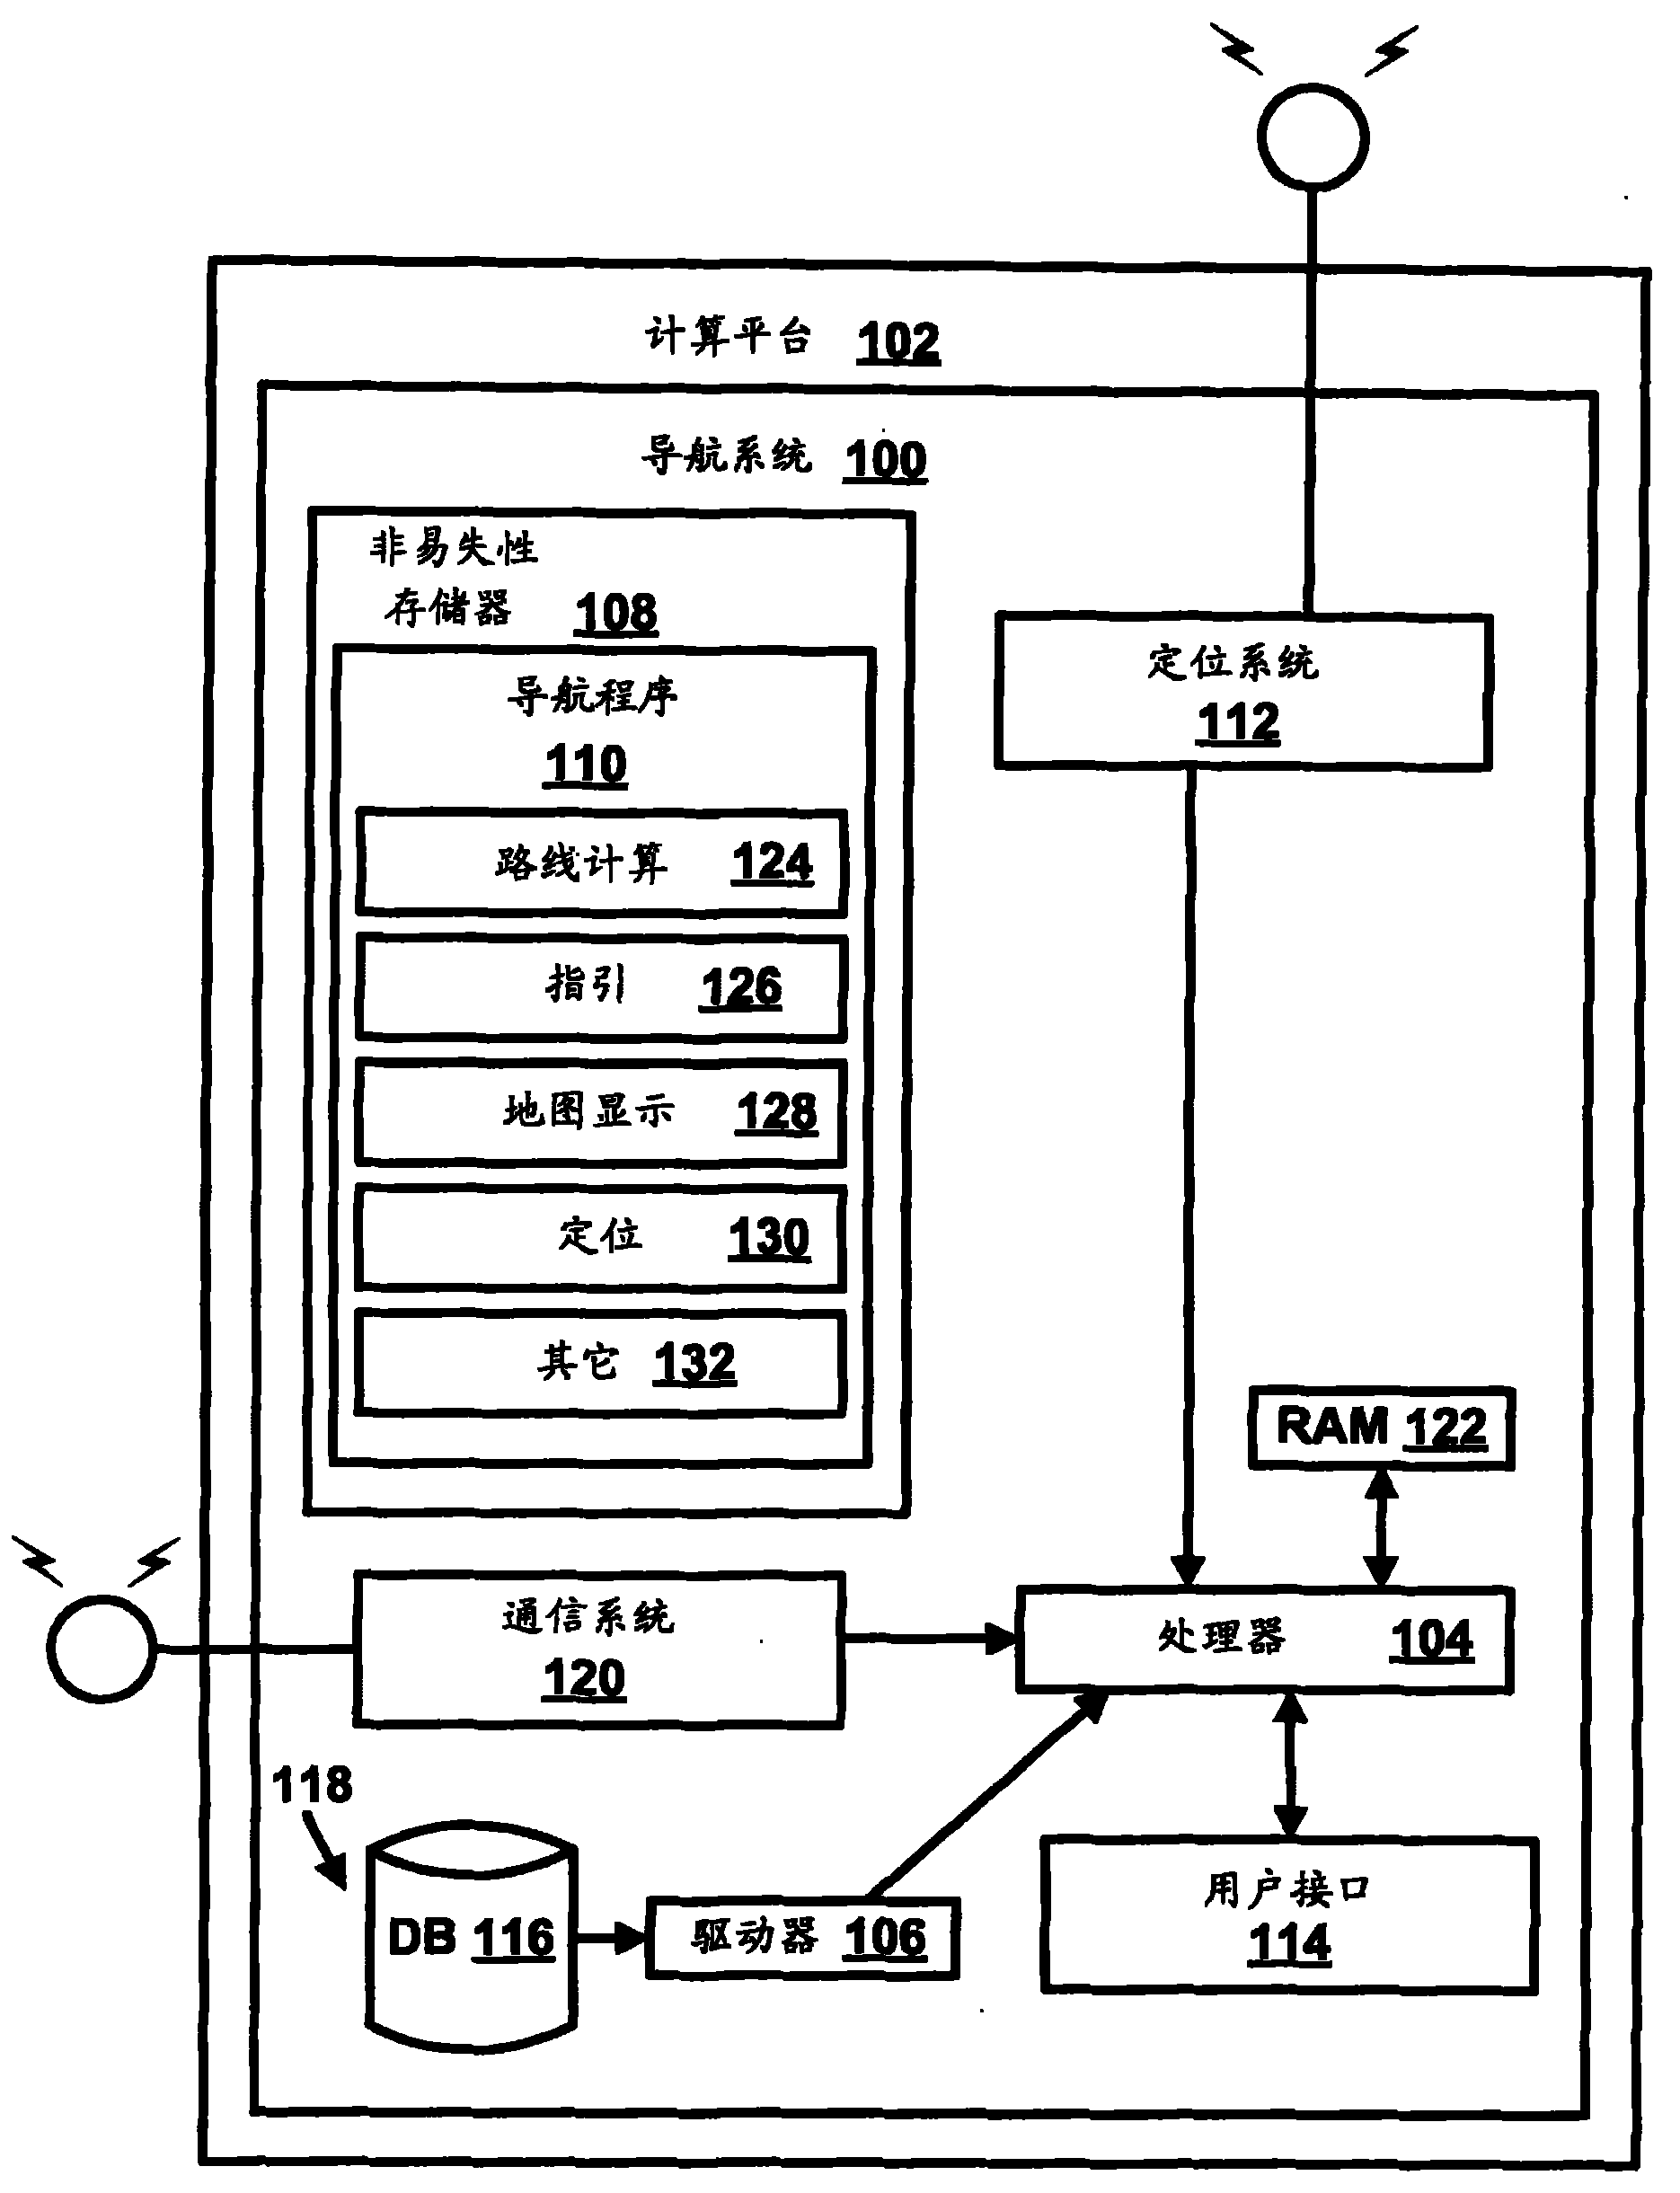 Method of operating a navigation system to provide route guidance